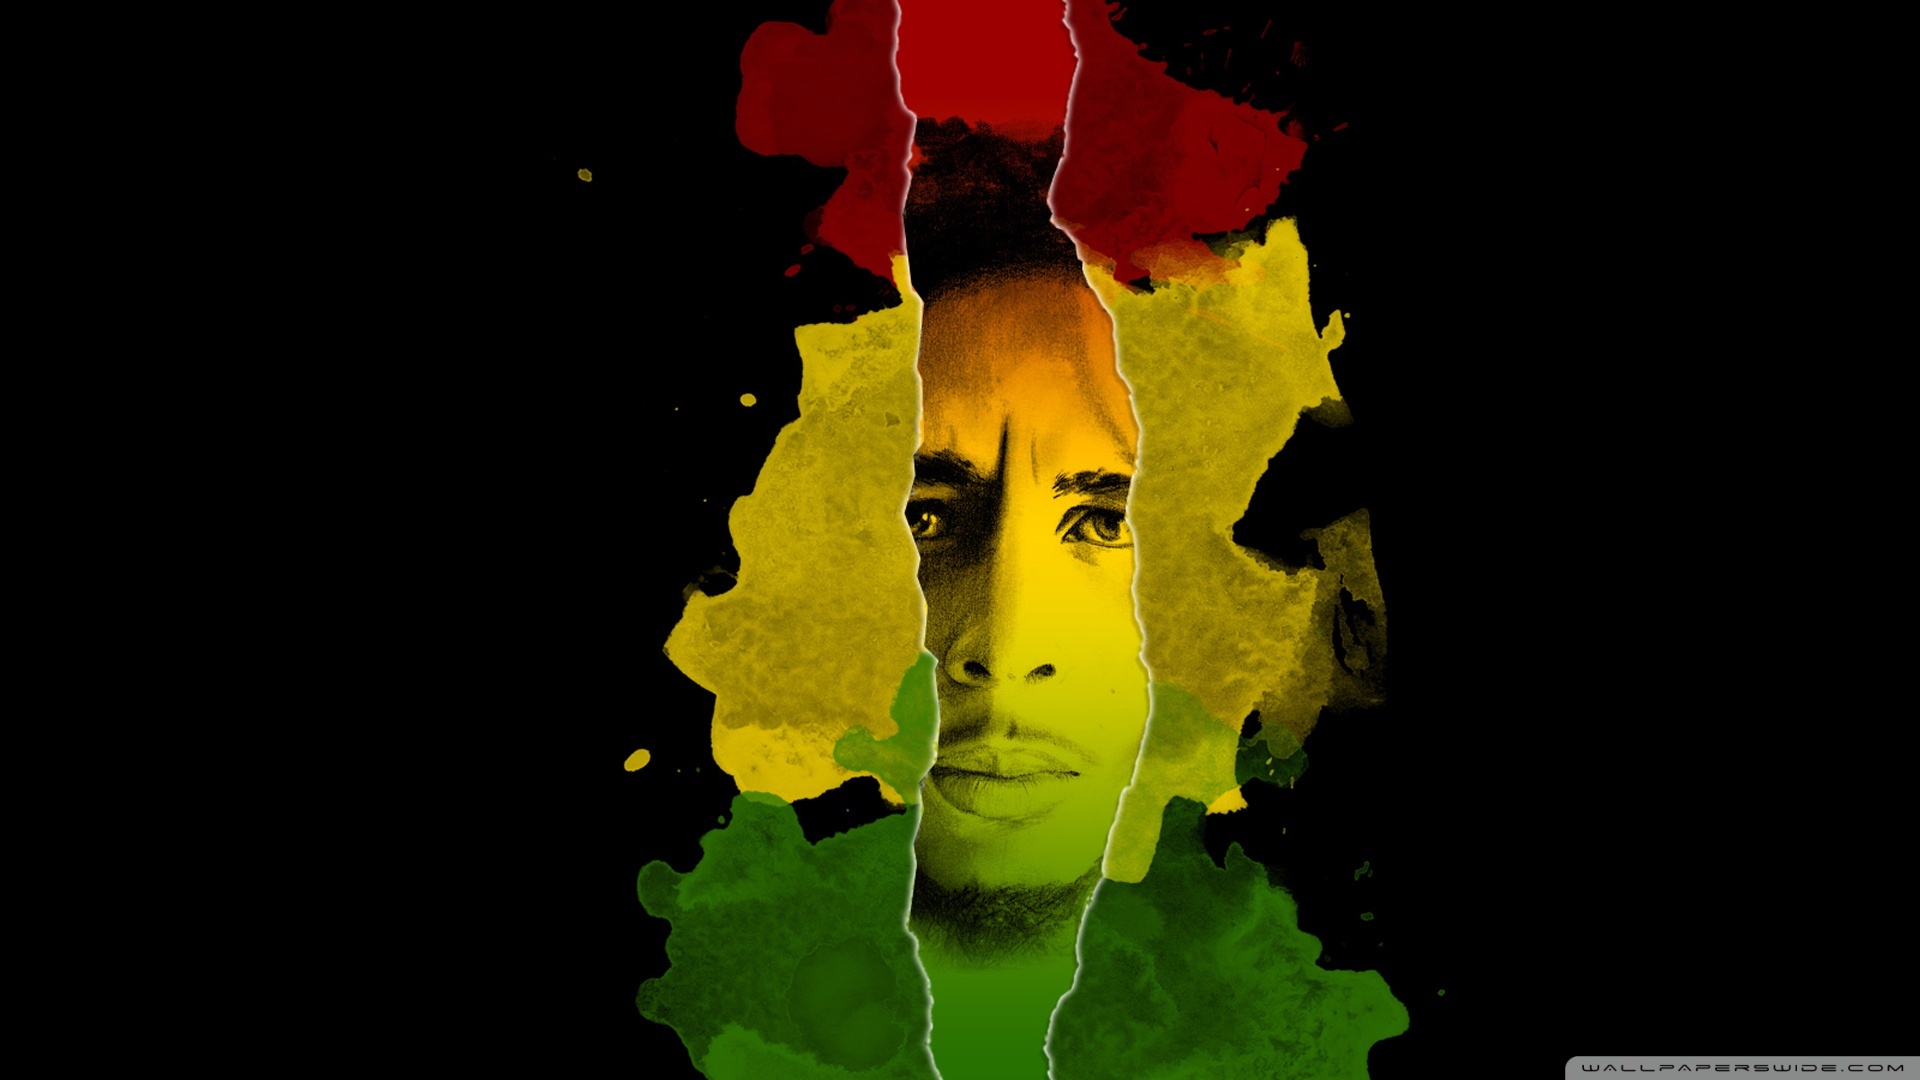 bob marley, music, people, background, artists, flags, men